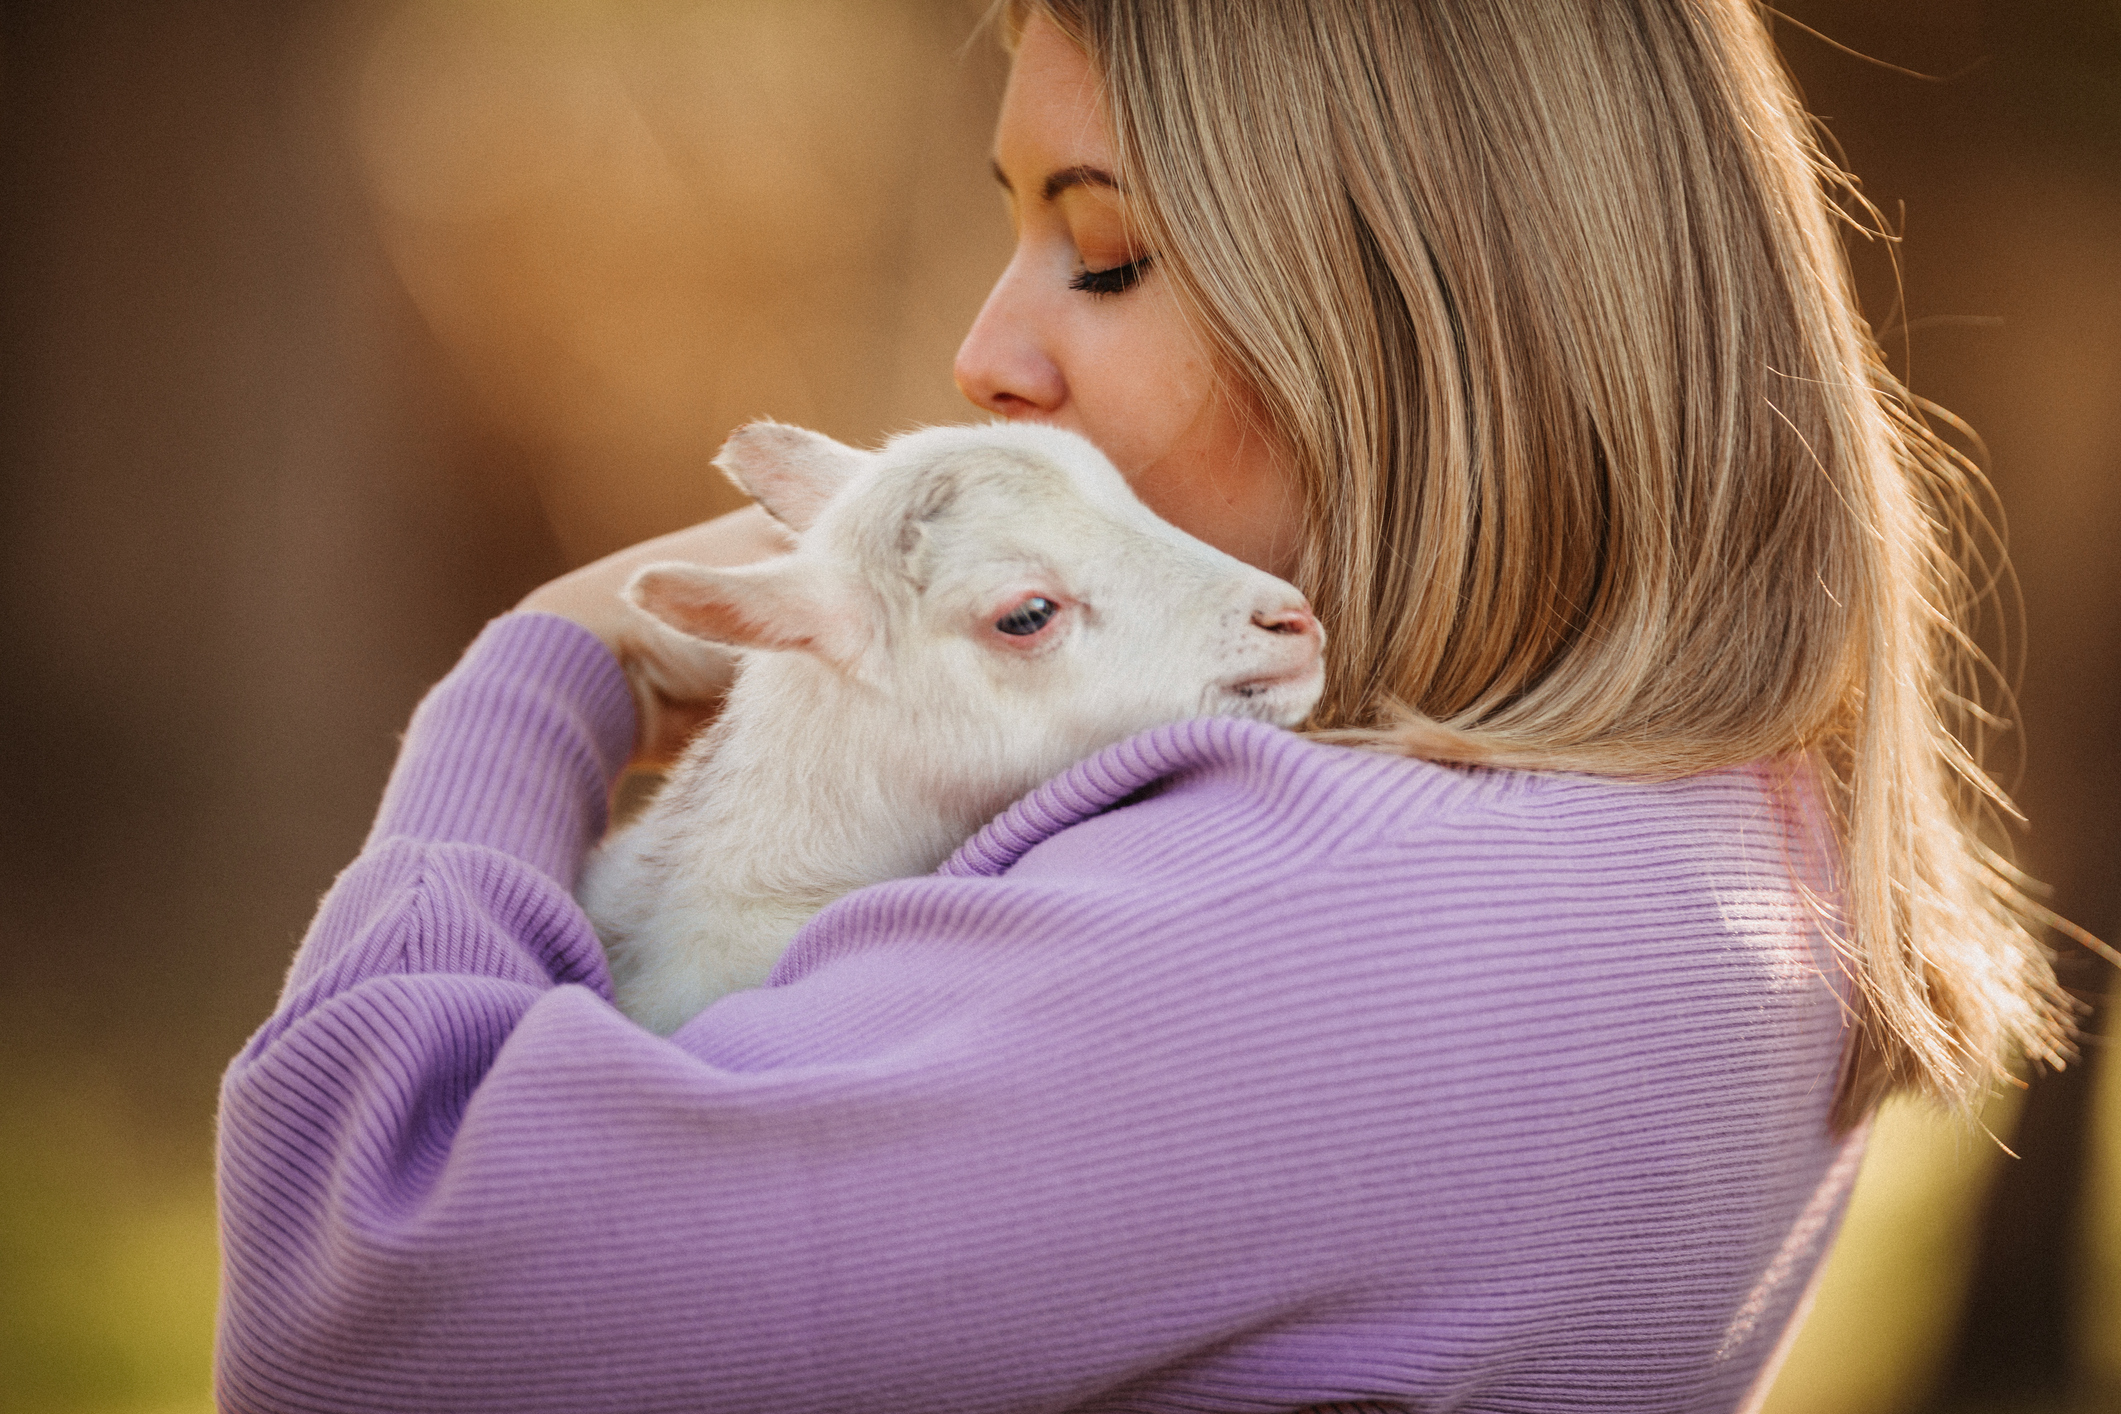 Beautiful young blonde woman cuddling with a newborn four hour old small lamb. Very selective and soft focus. Grain added.